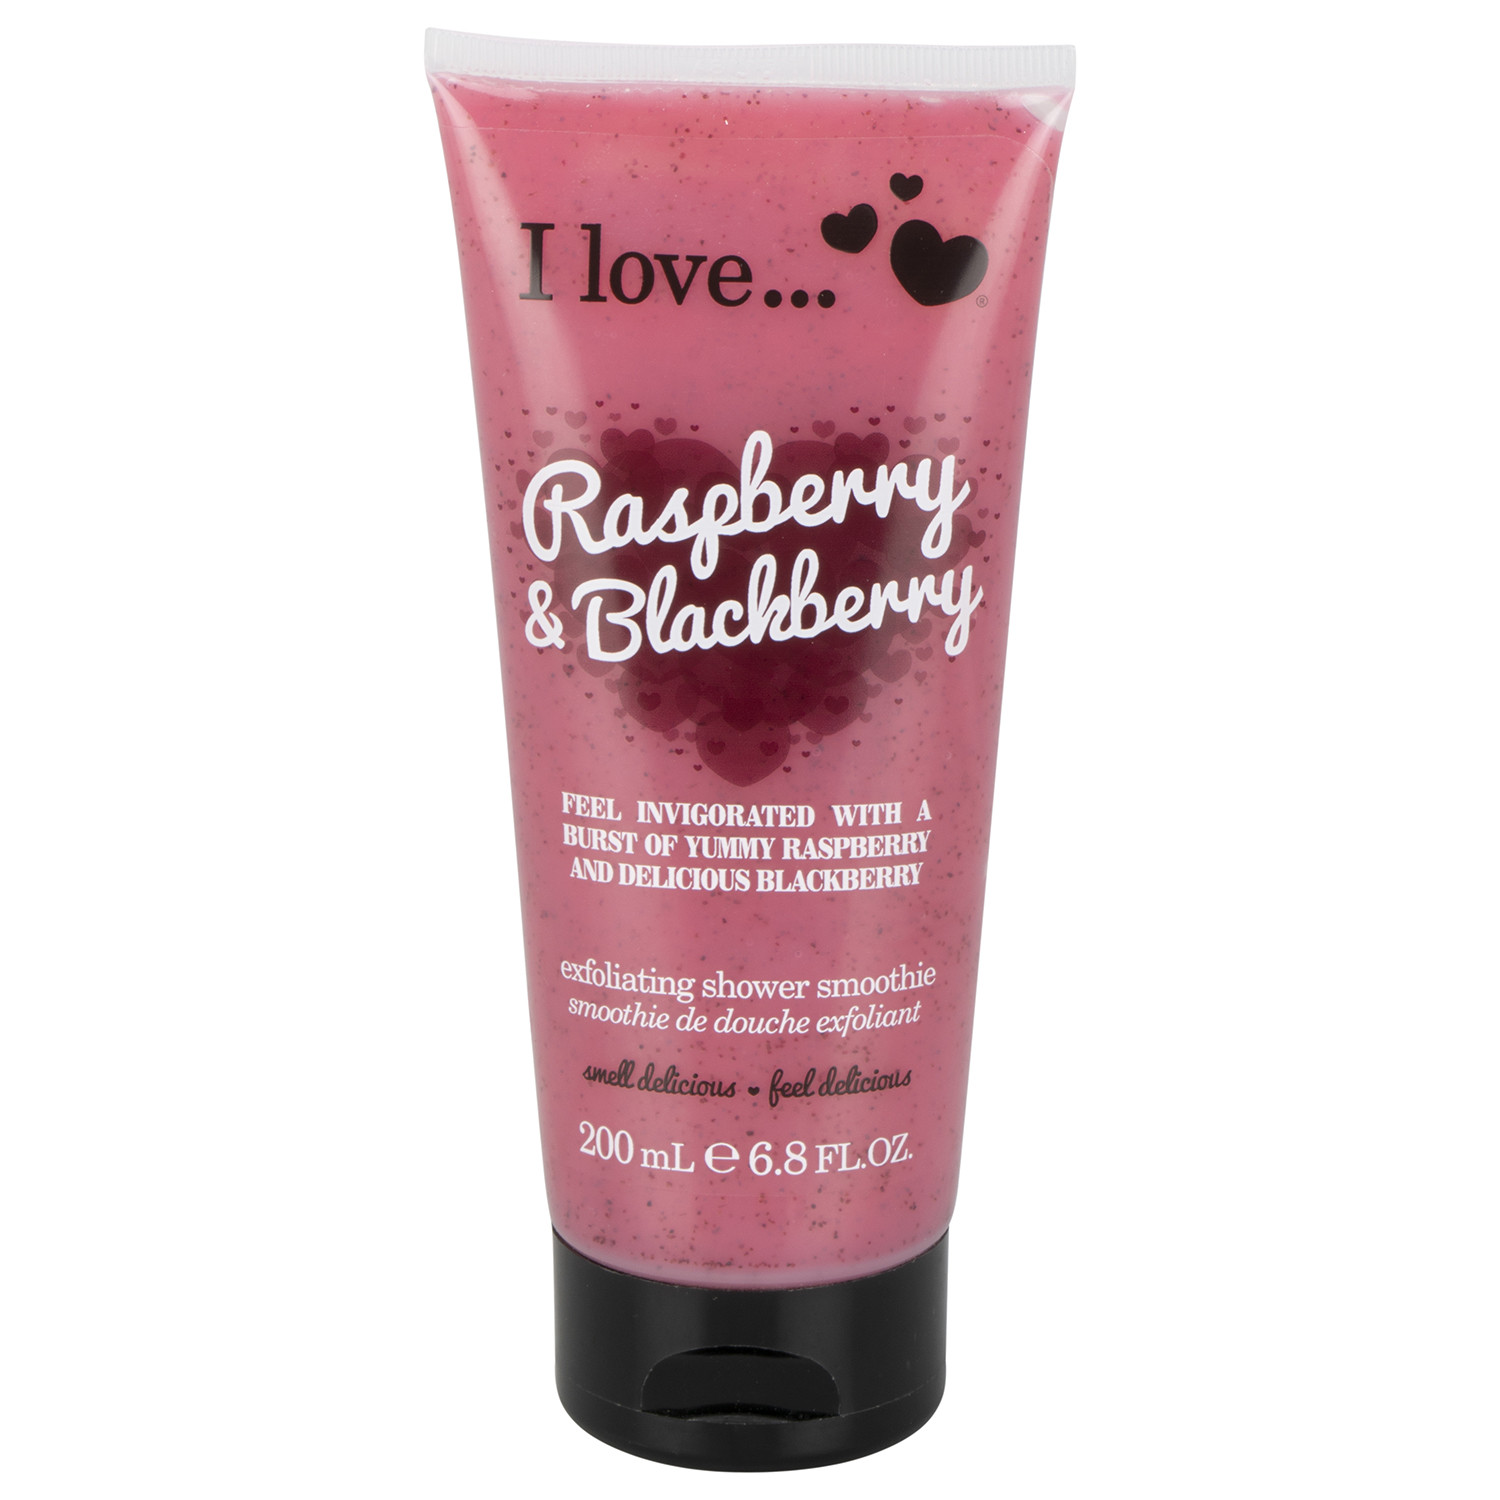 I Love Exfoliating Shower Smoothie 200ml - Raspberry and Blackberry Image